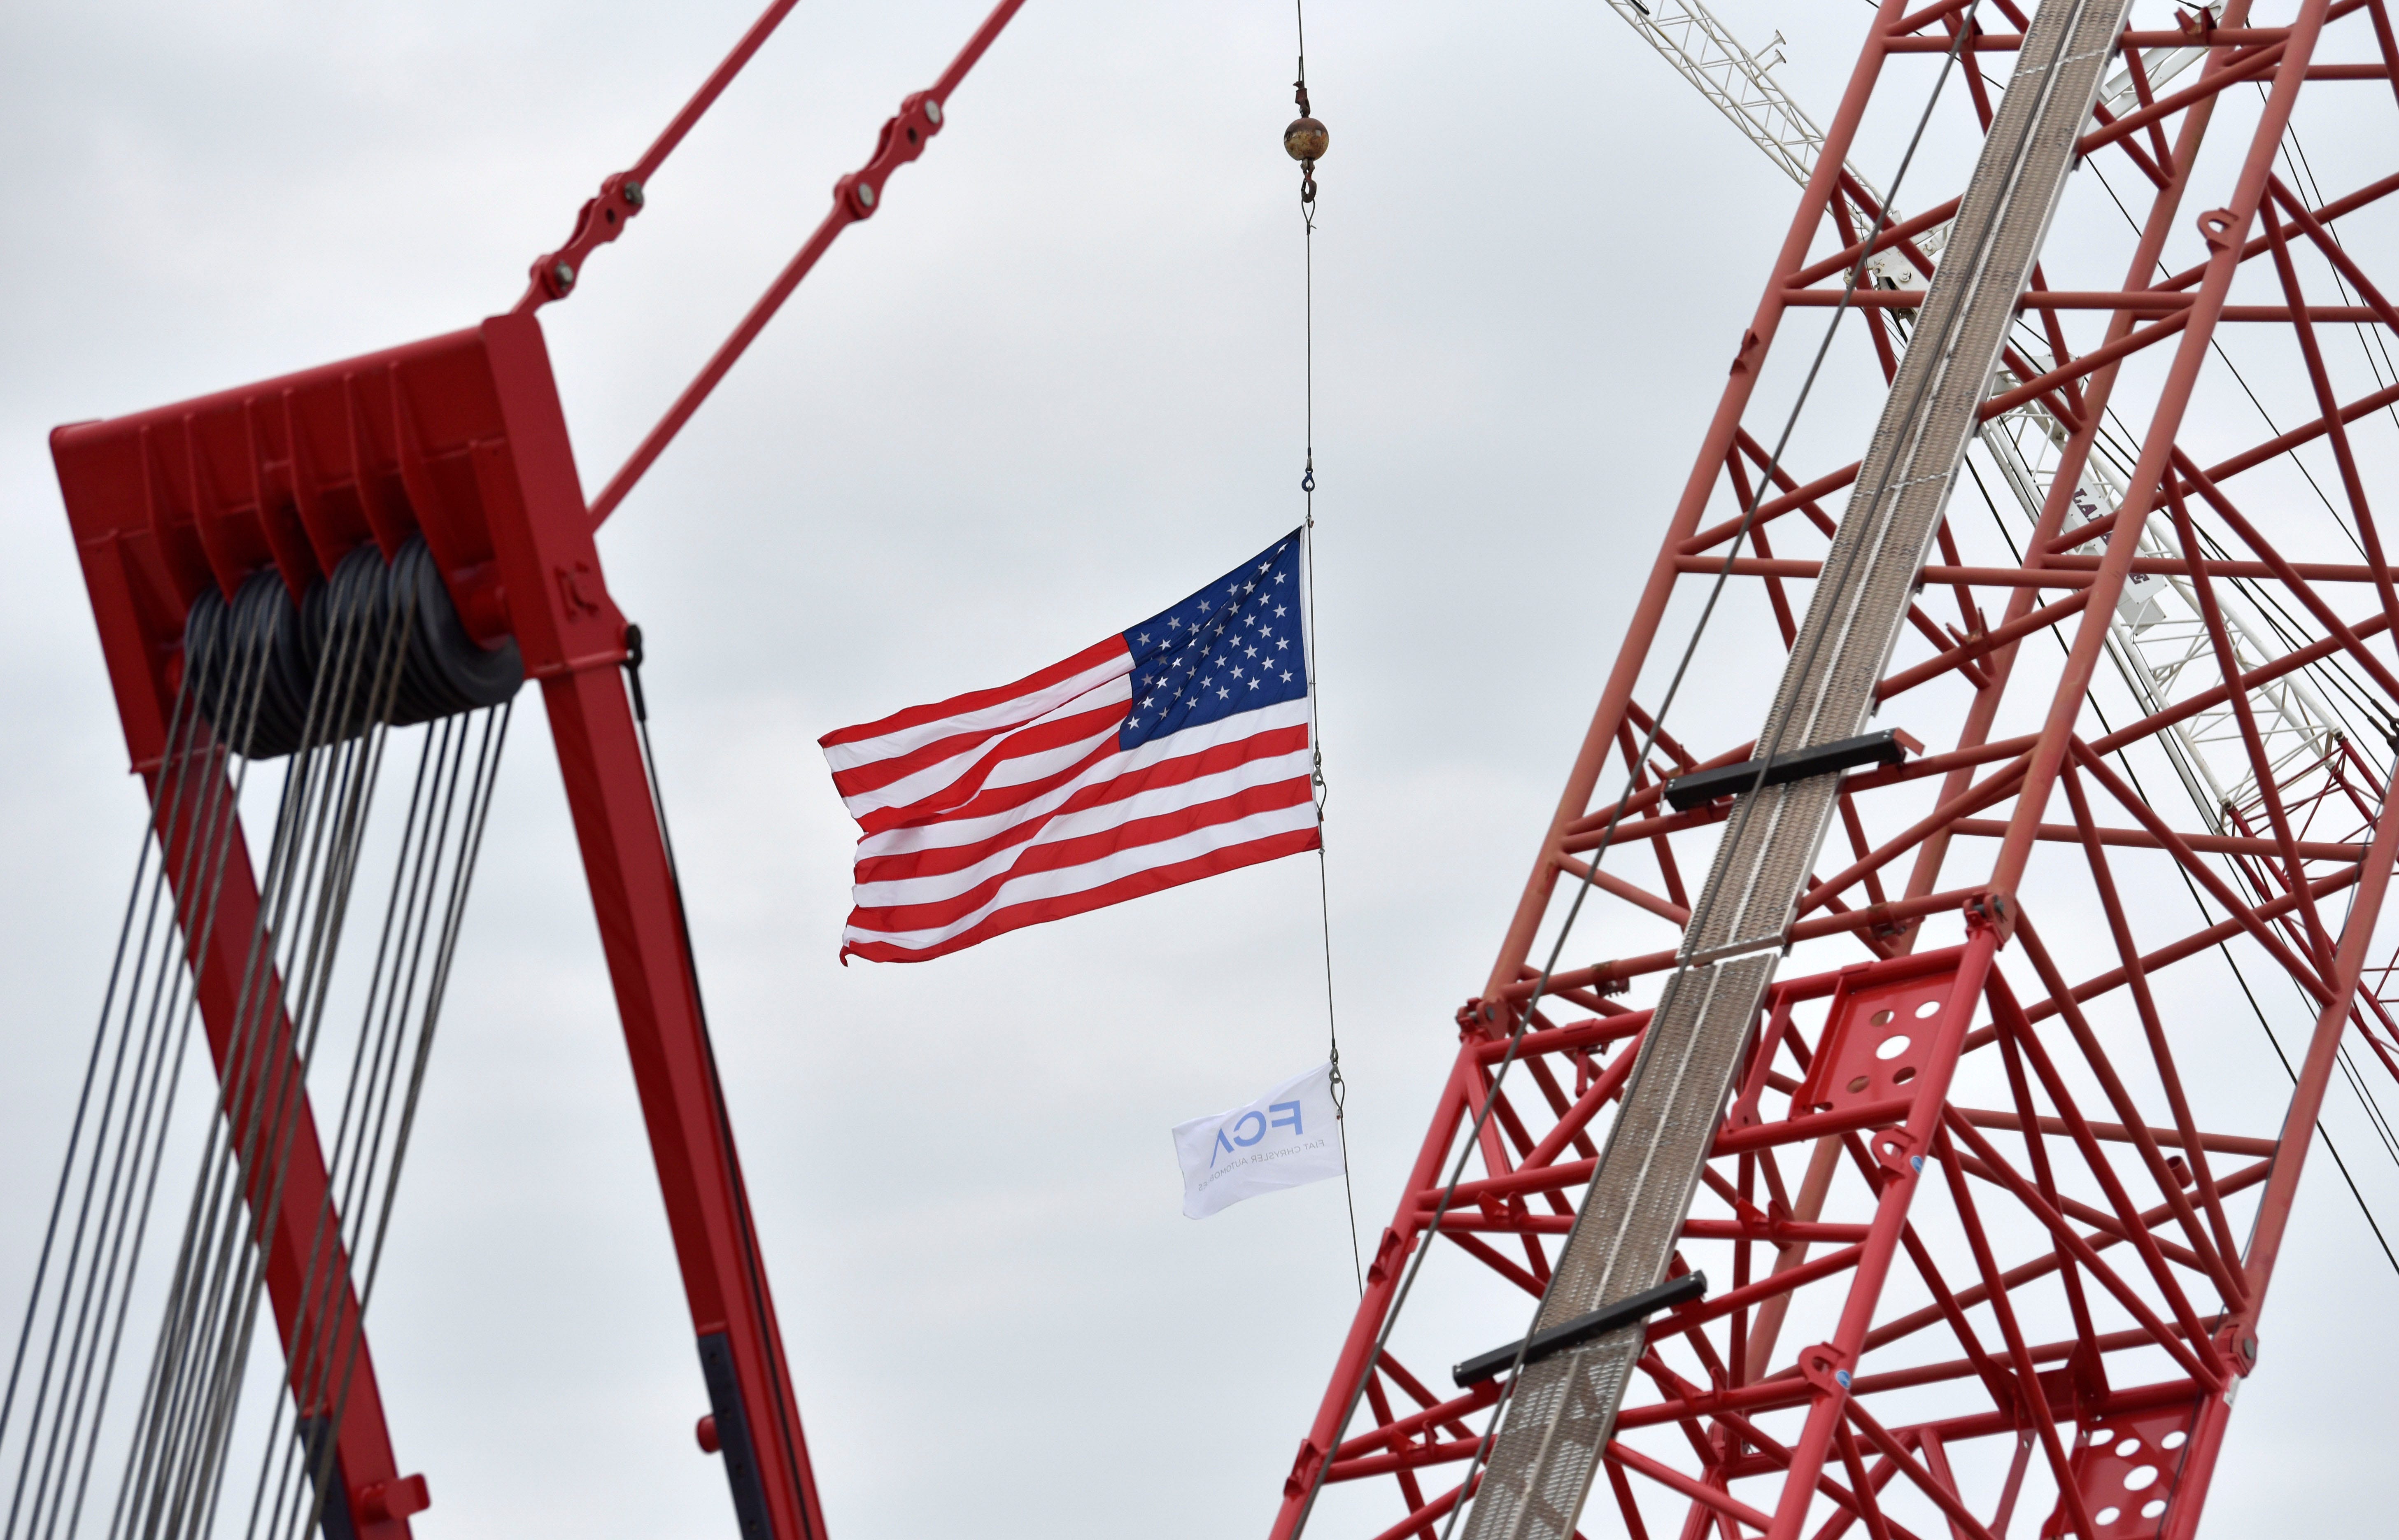 The U.S. flag and FCA flag blow in the breeze in the under-construction paint shop area.